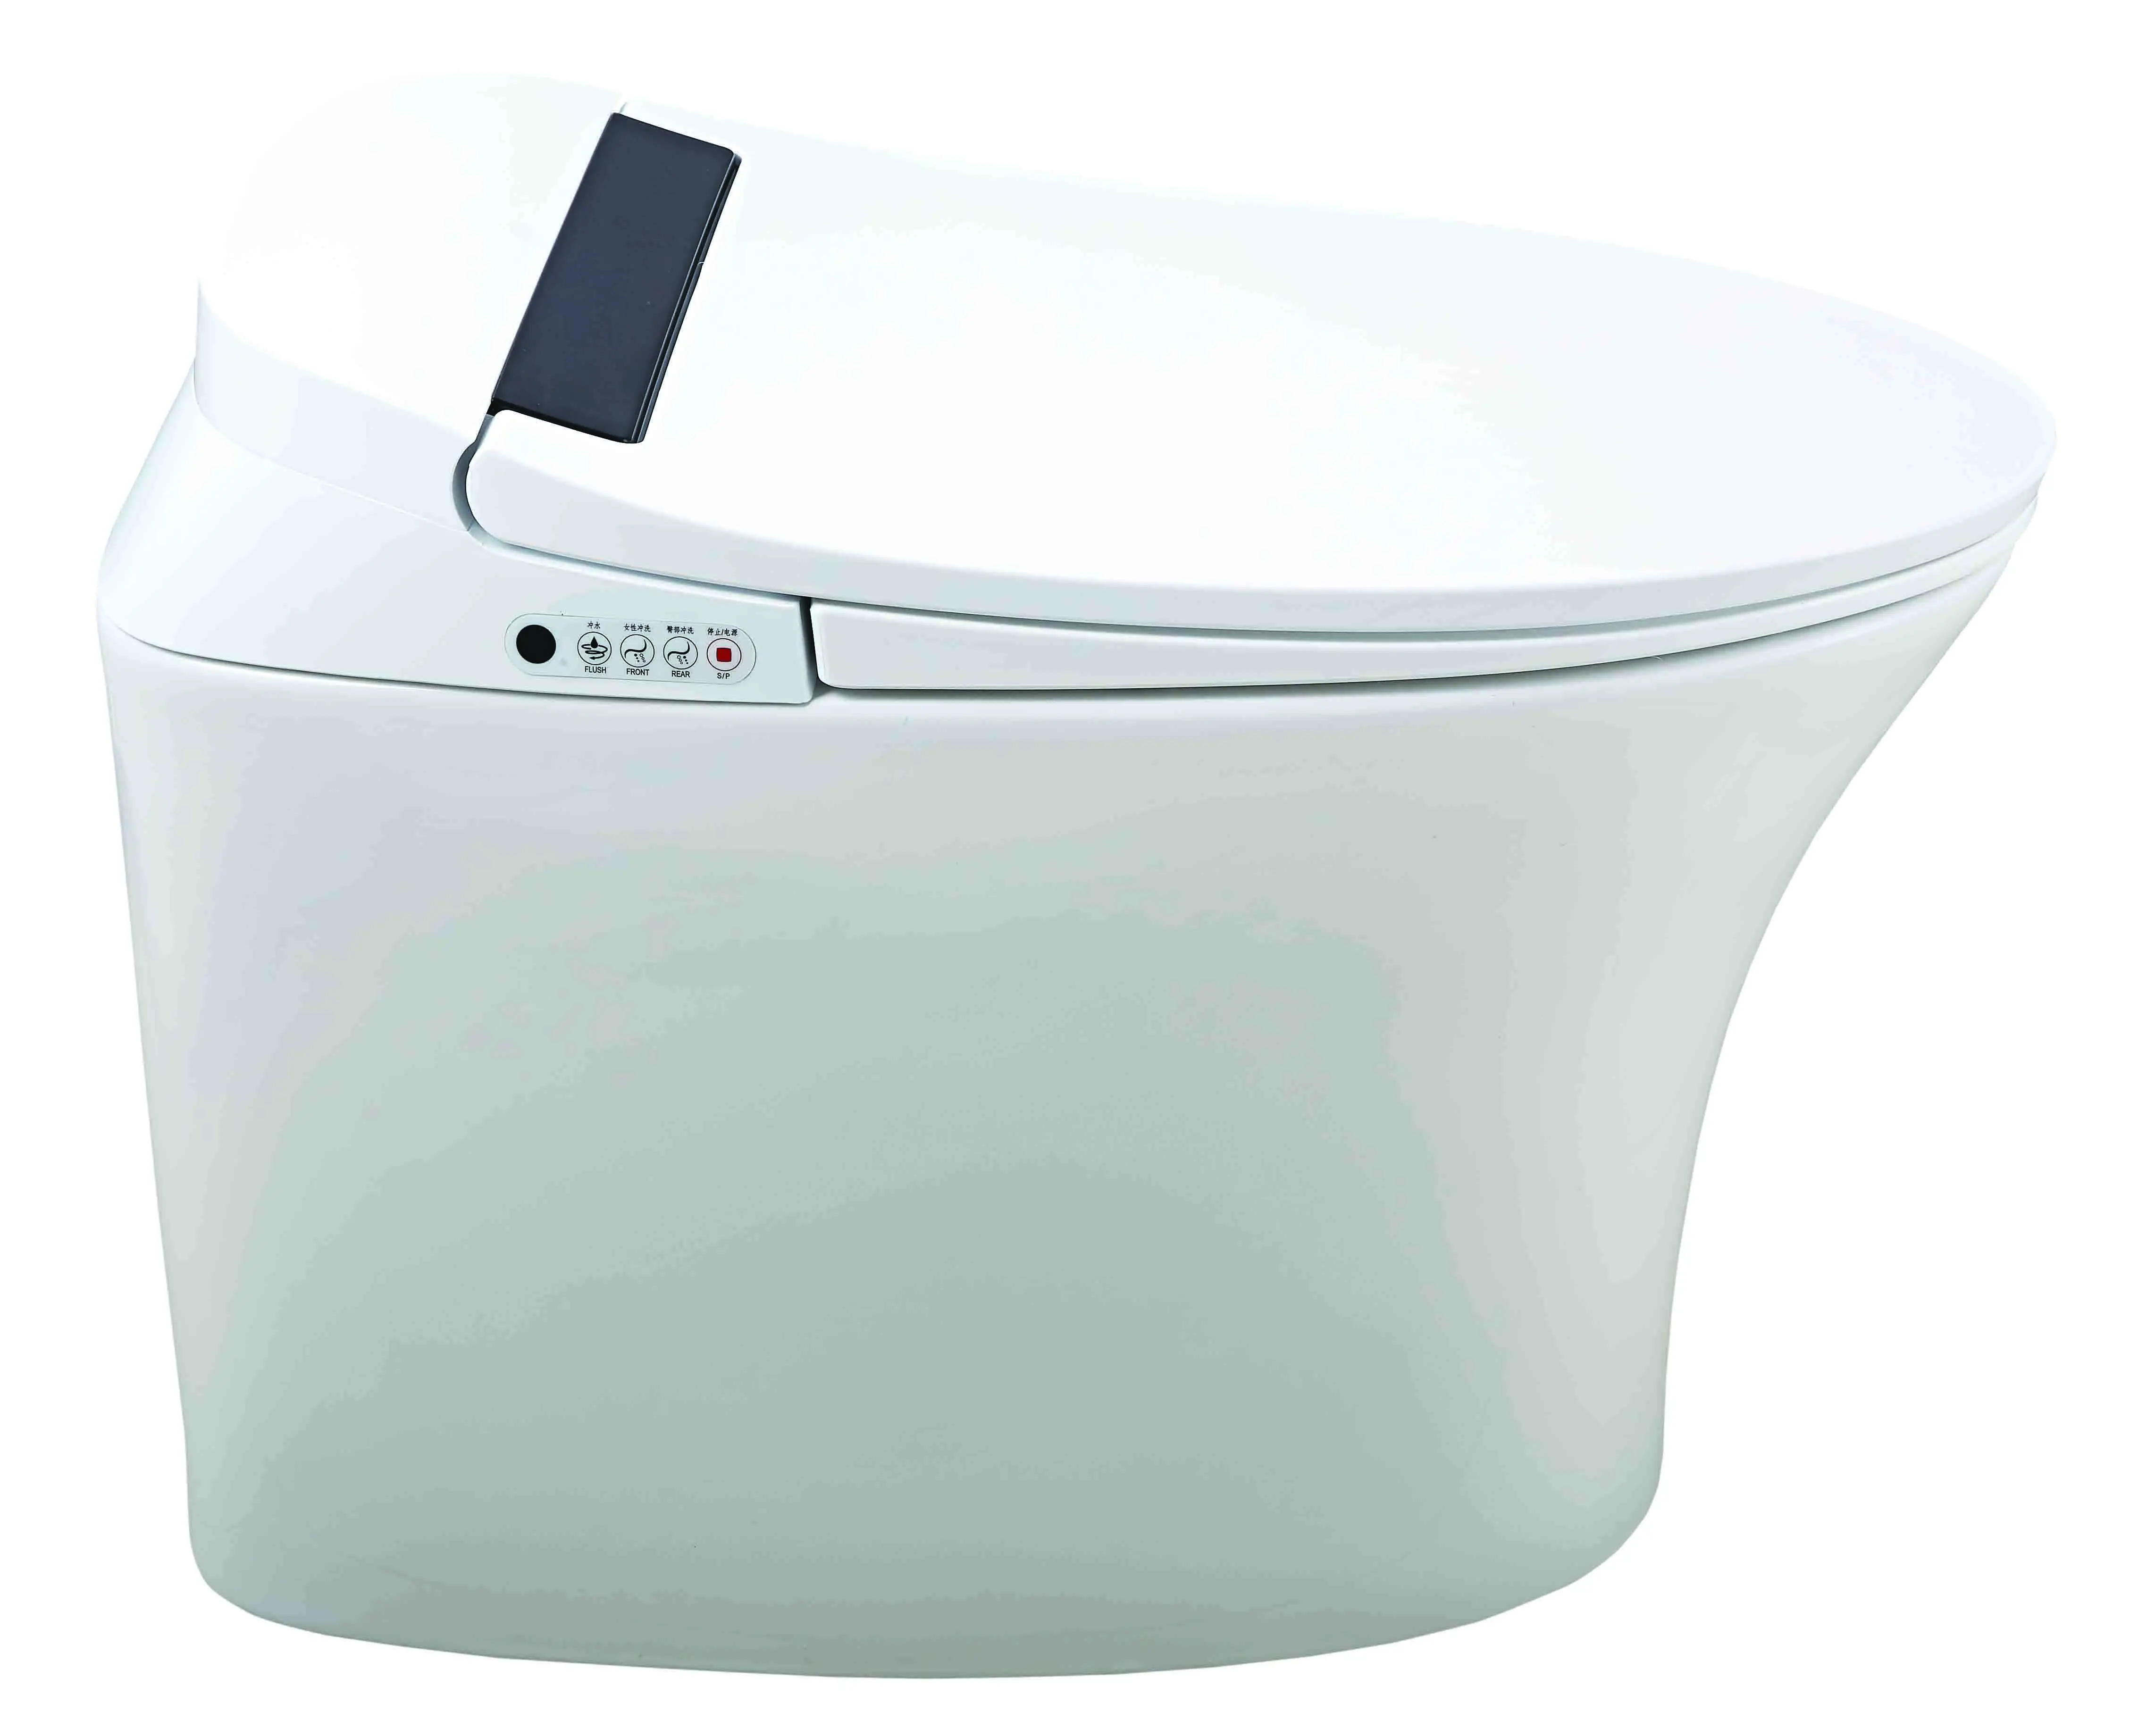 Sanitary wares bathroom ceramic one piece electric intelligent toilet with warm seat airdrying